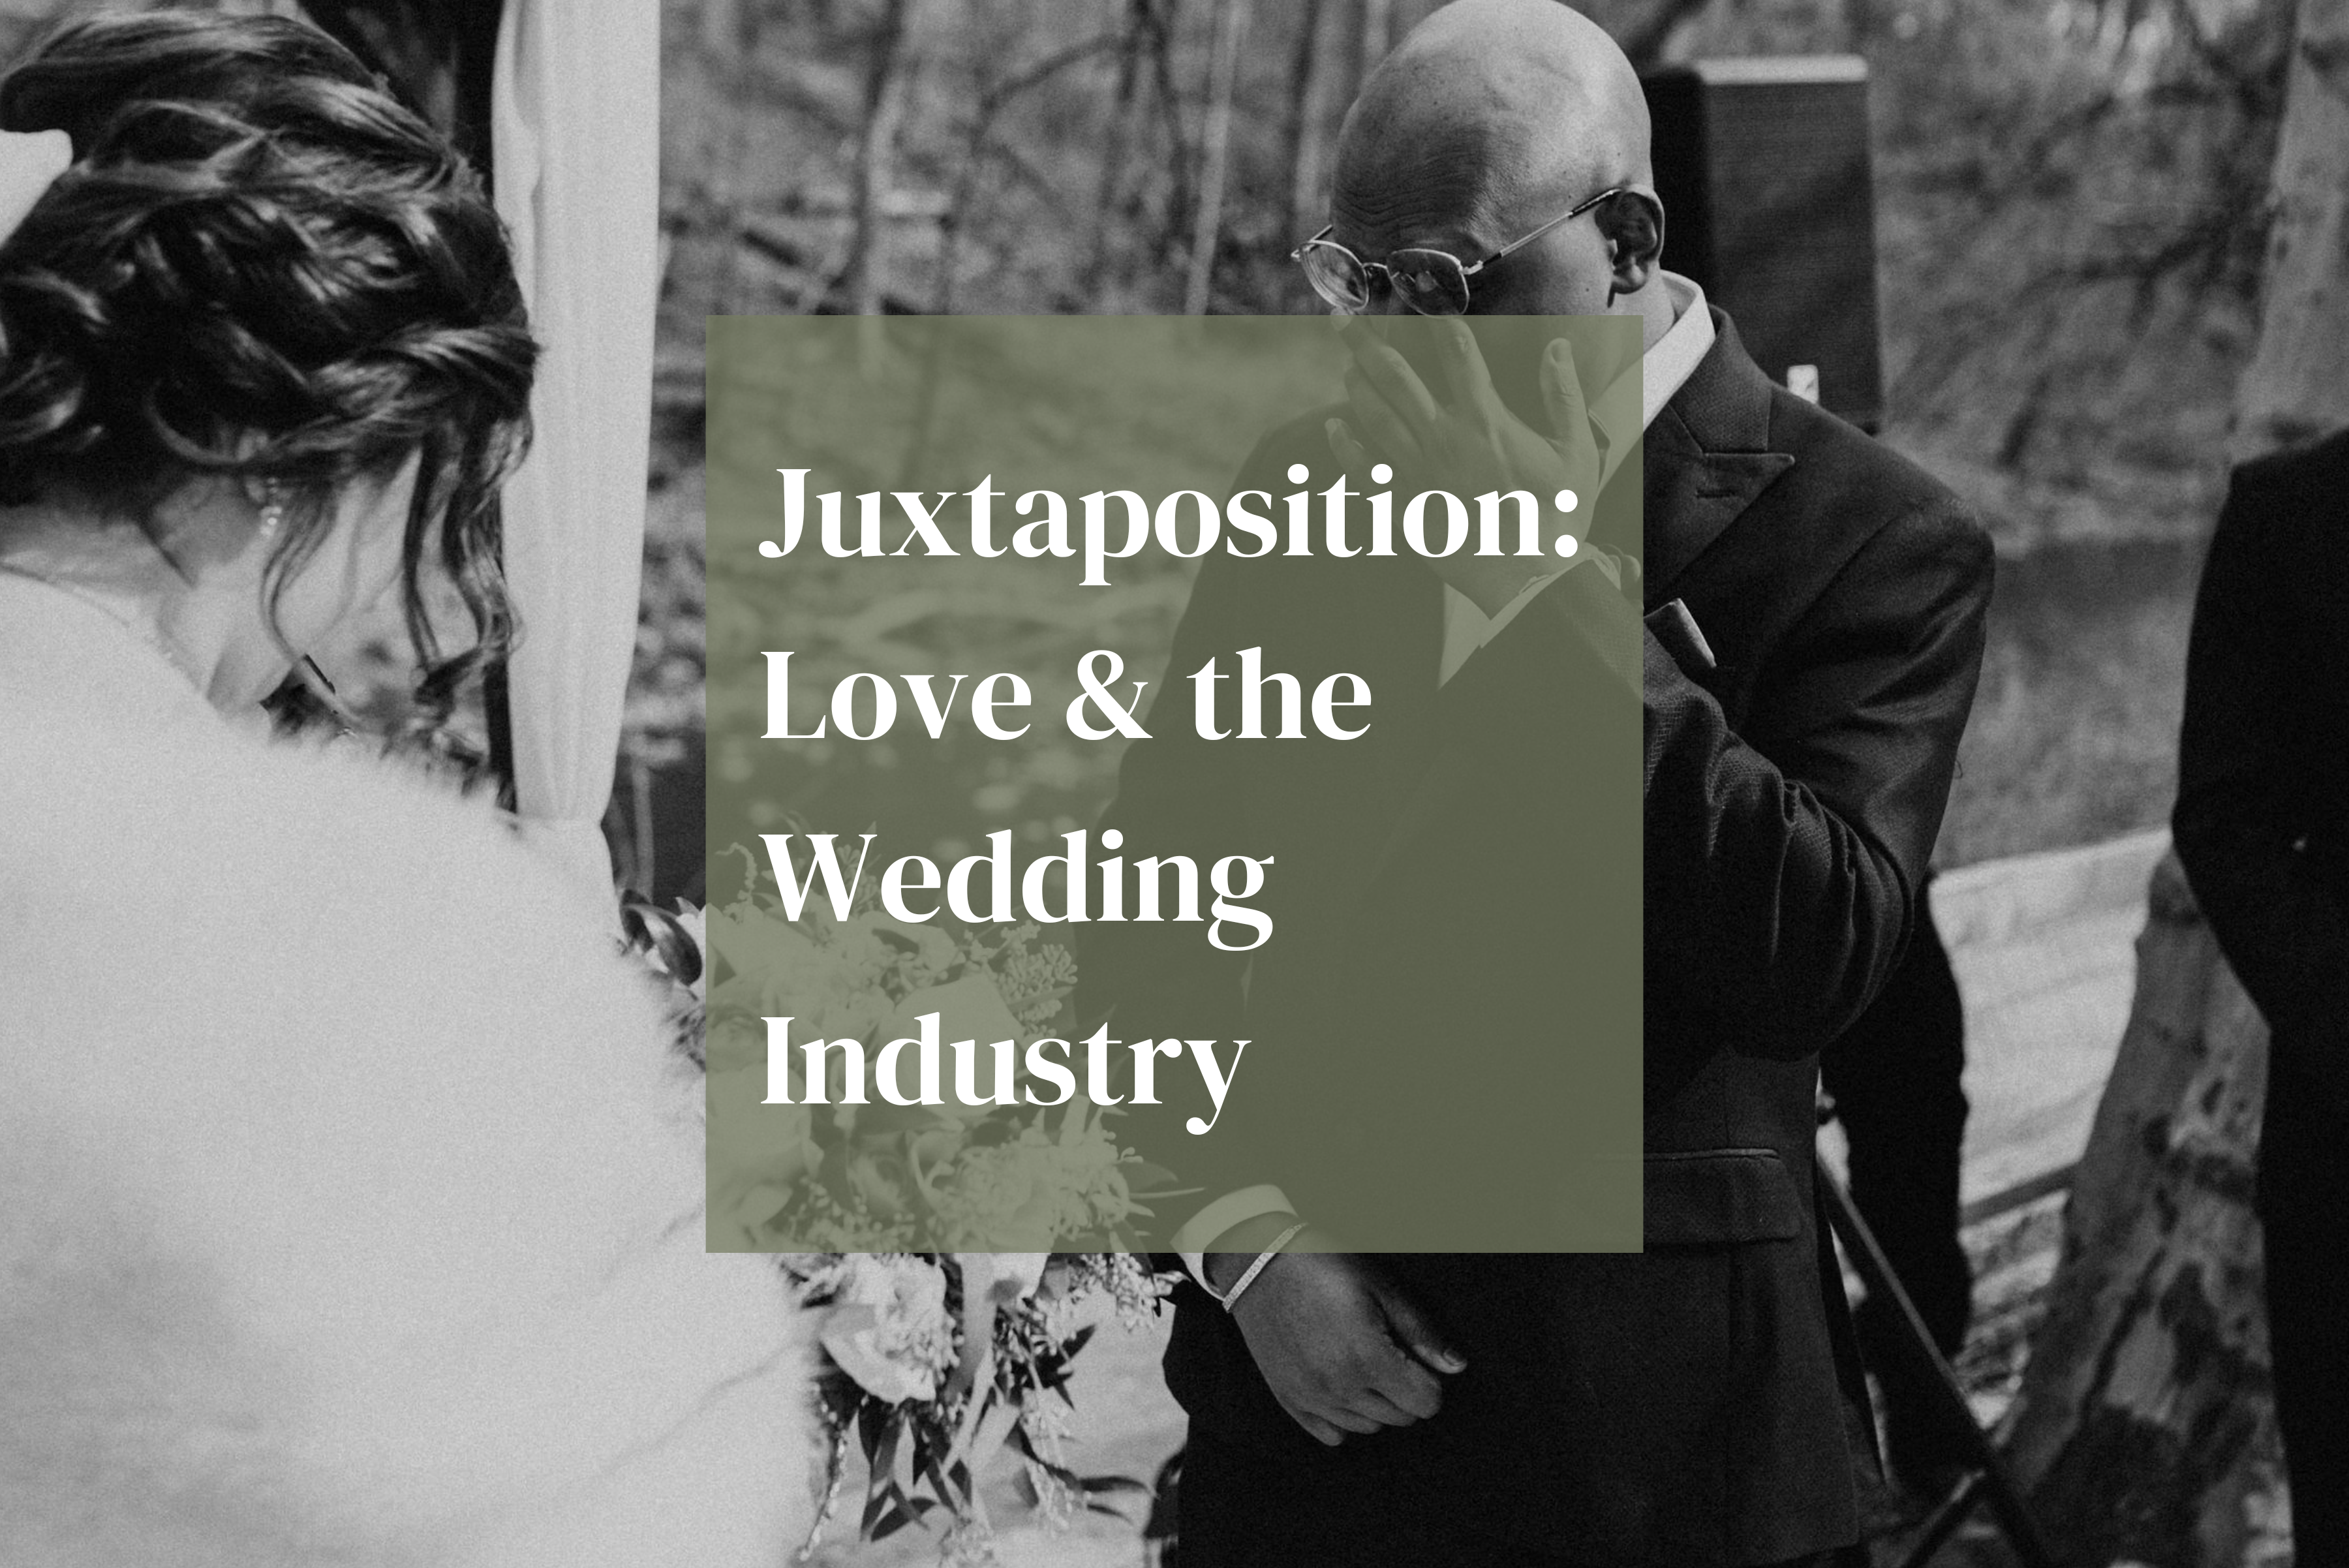 The_juxtaposition_of_love_and_the_wedding_industry